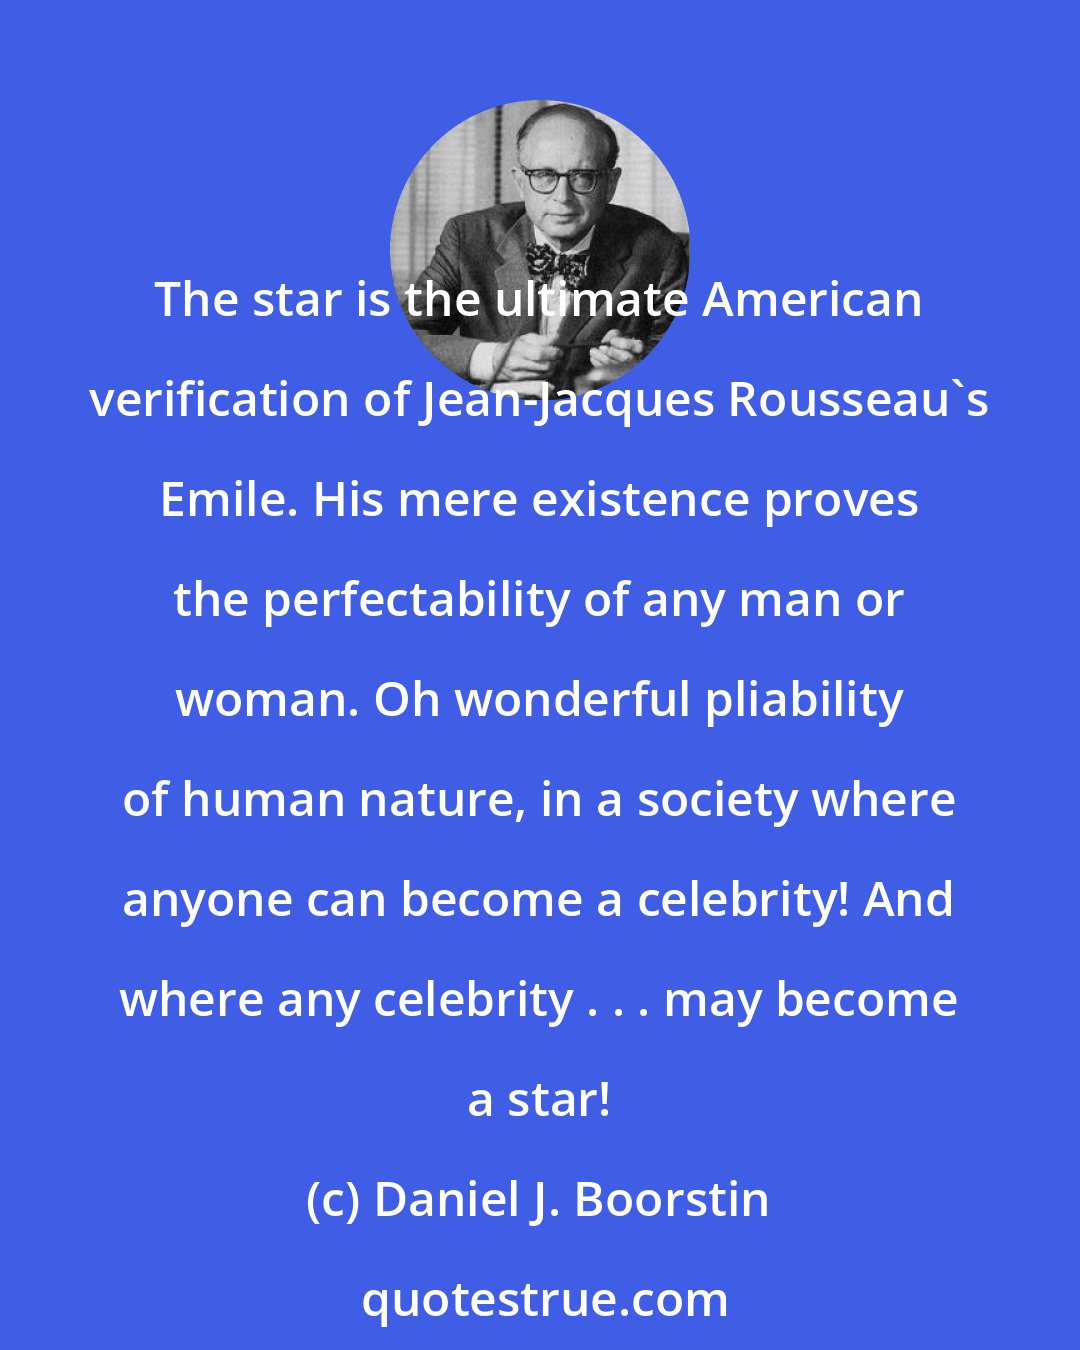 Daniel J. Boorstin: The star is the ultimate American verification of Jean-Jacques Rousseau's Emile. His mere existence proves the perfectability of any man or woman. Oh wonderful pliability of human nature, in a society where anyone can become a celebrity! And where any celebrity . . . may become a star!